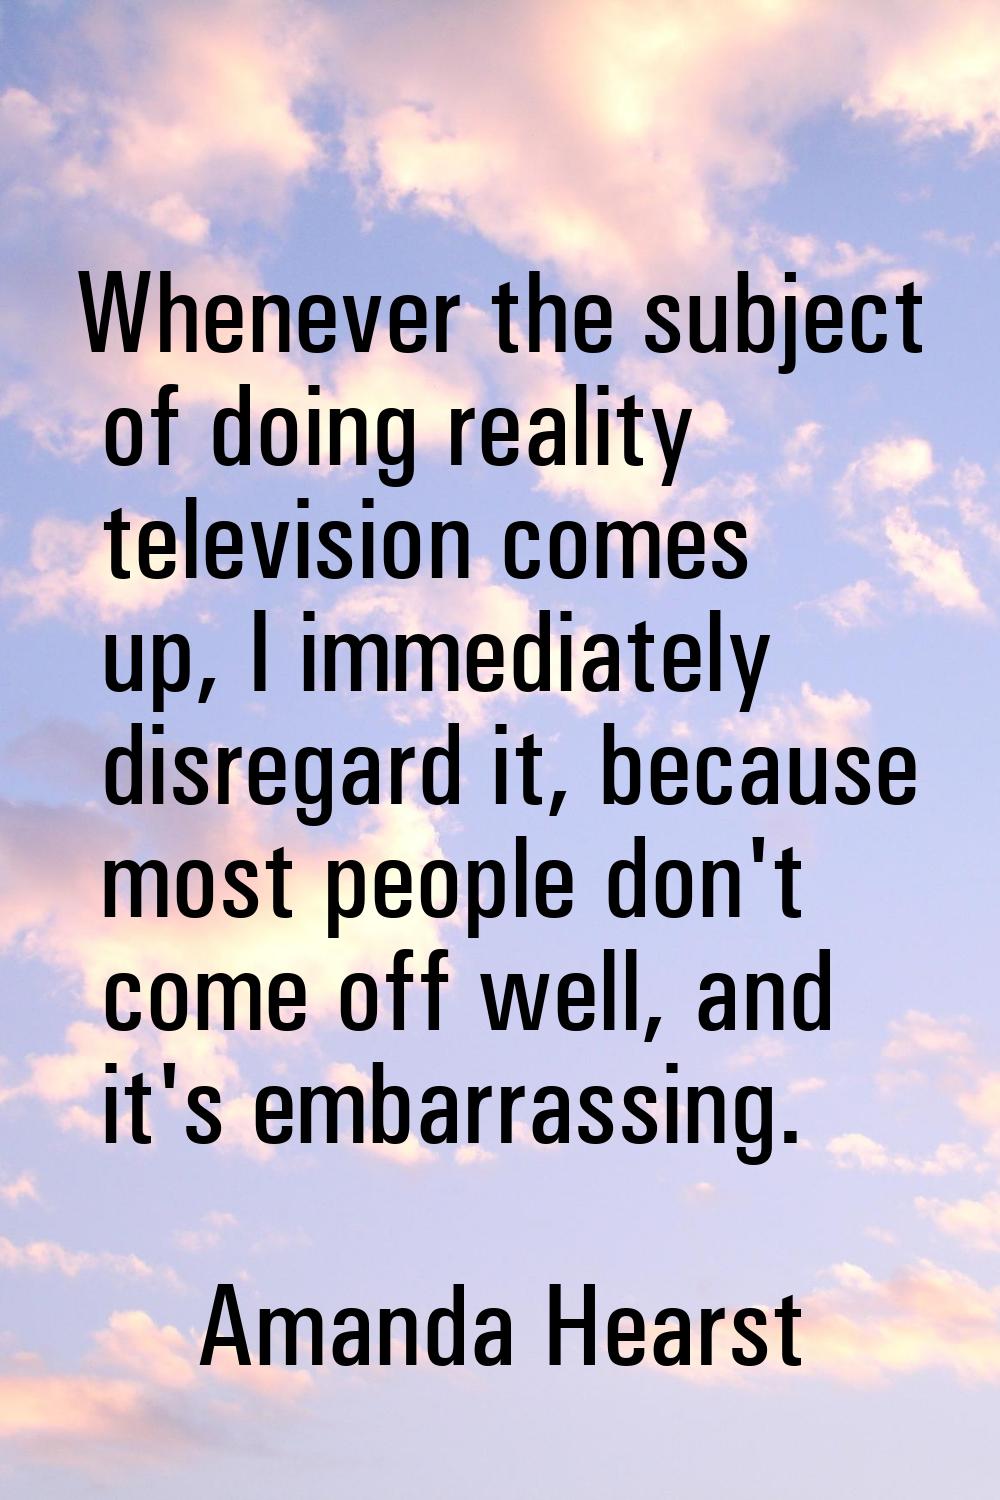 Whenever the subject of doing reality television comes up, I immediately disregard it, because most